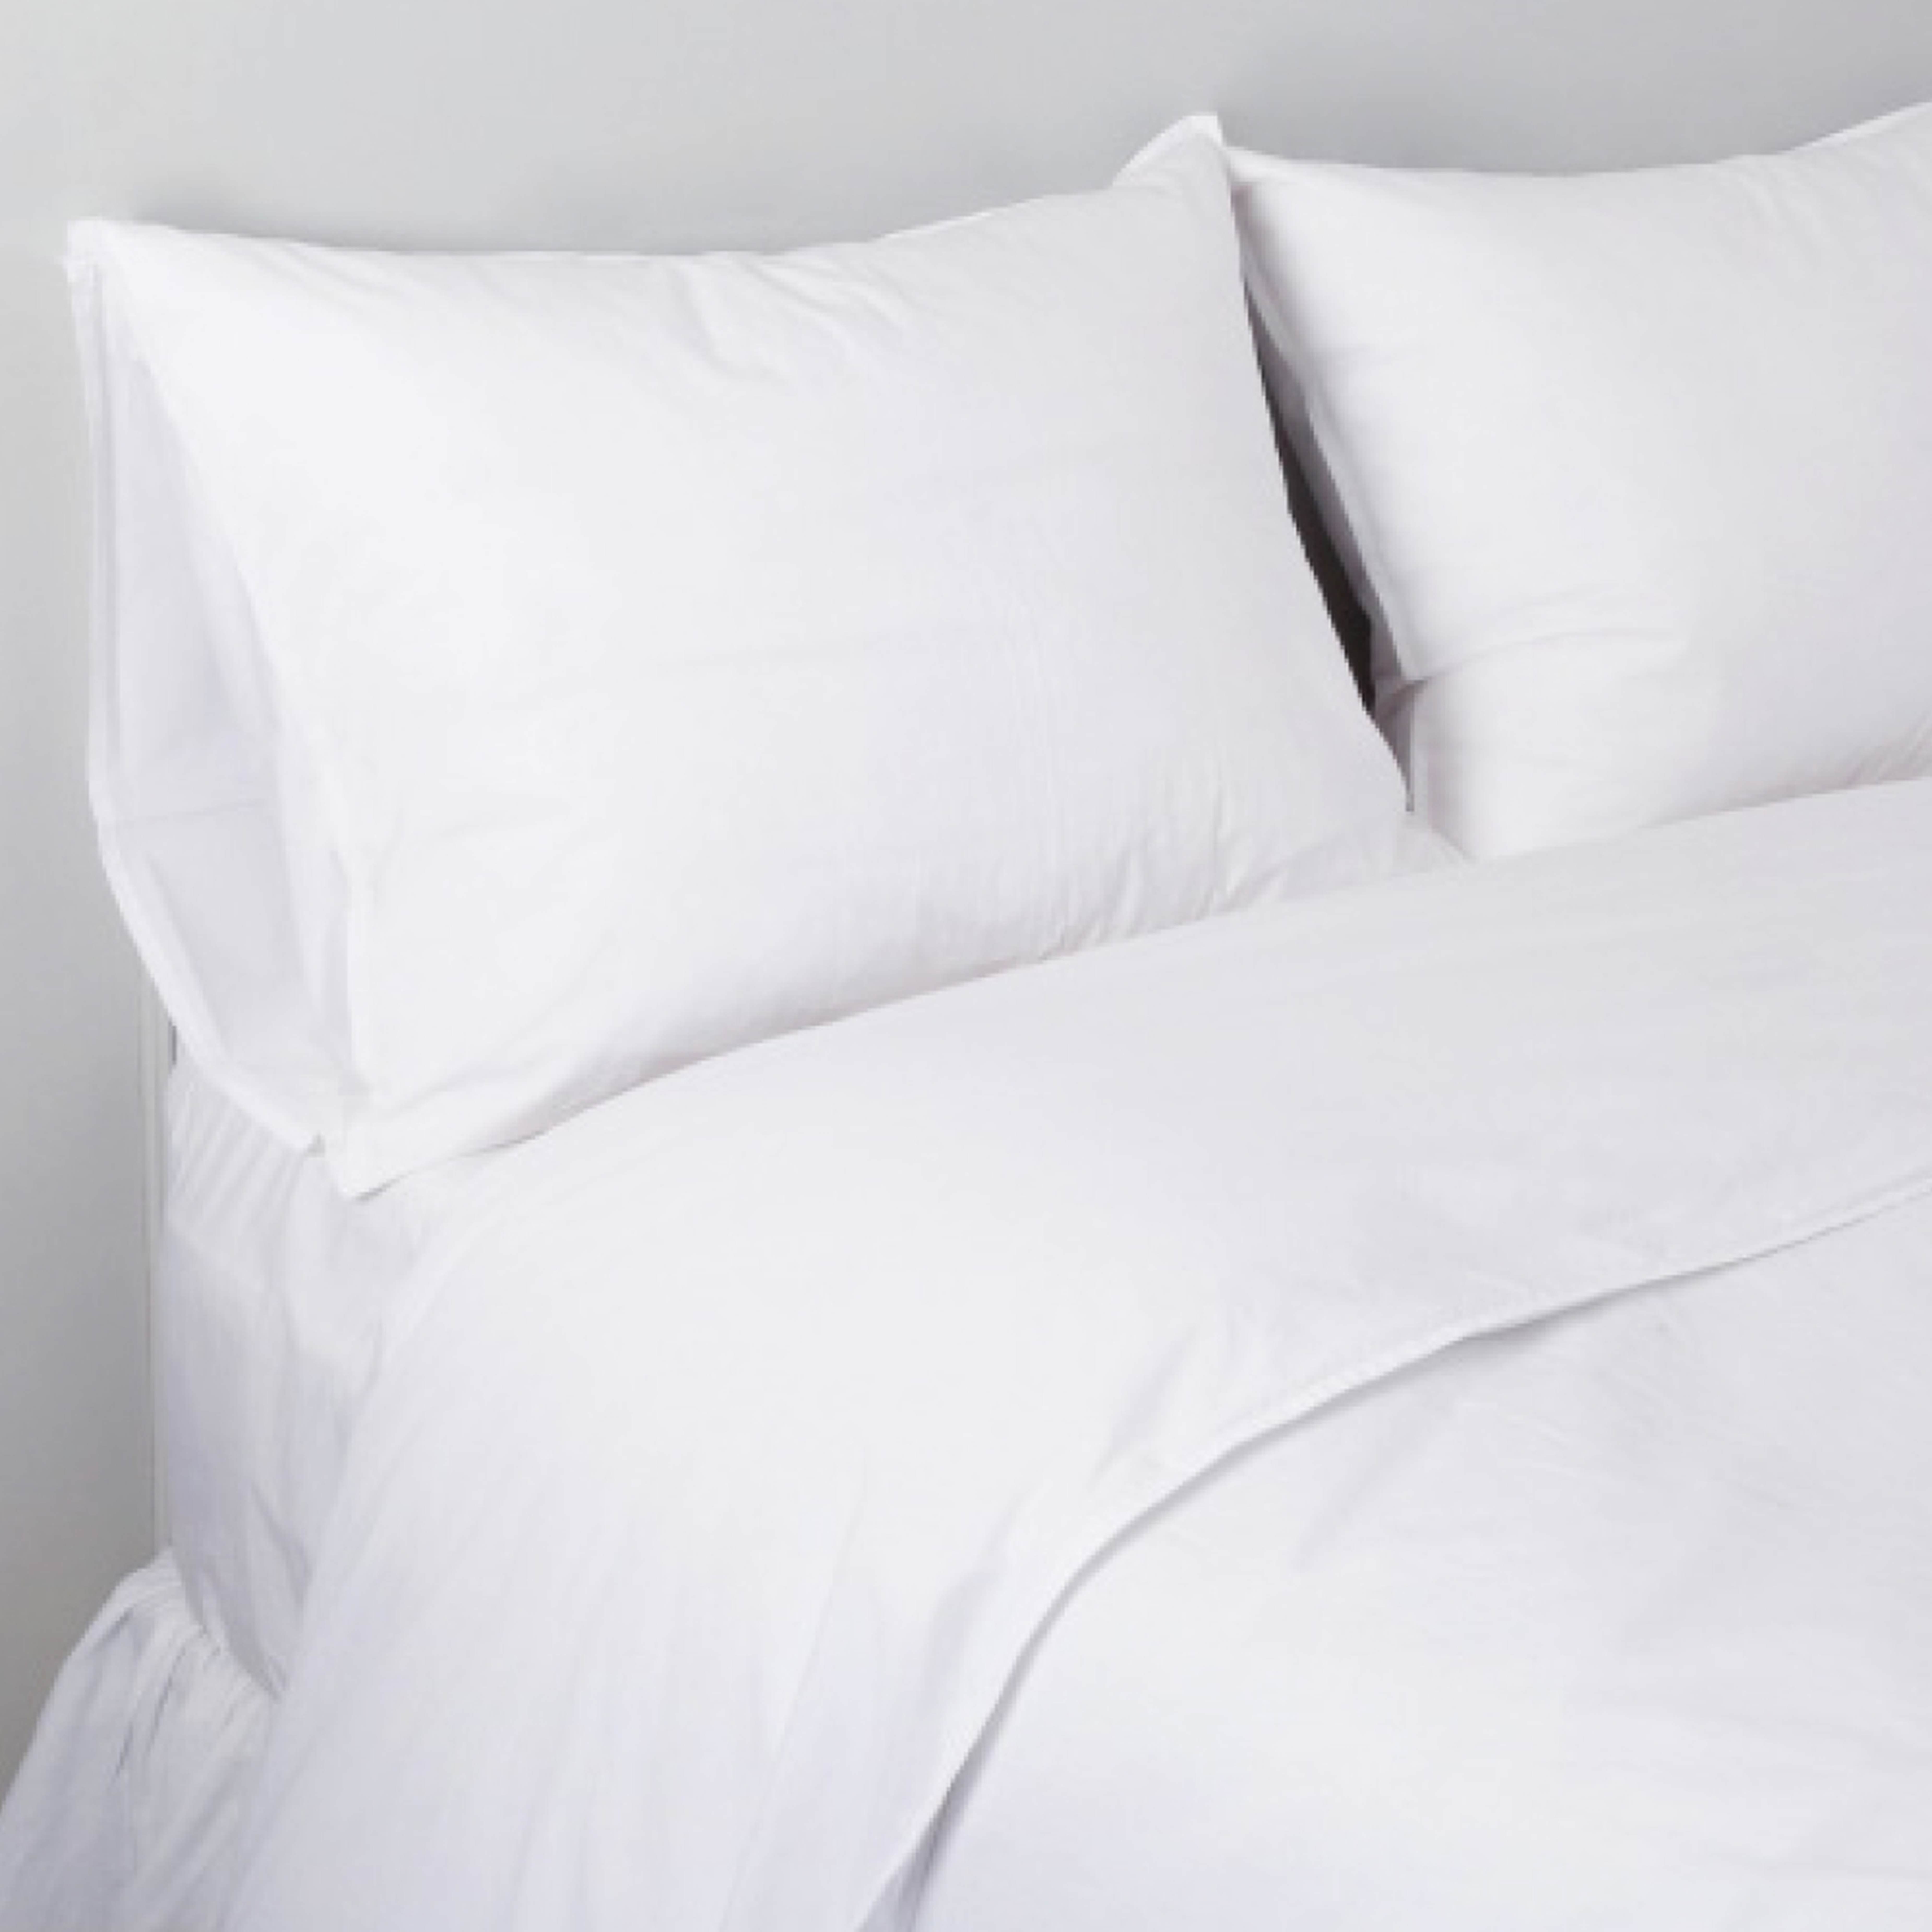 Parker Cotton Percale Duvet Set by Pom Pom at Home - Lulu and Georgia